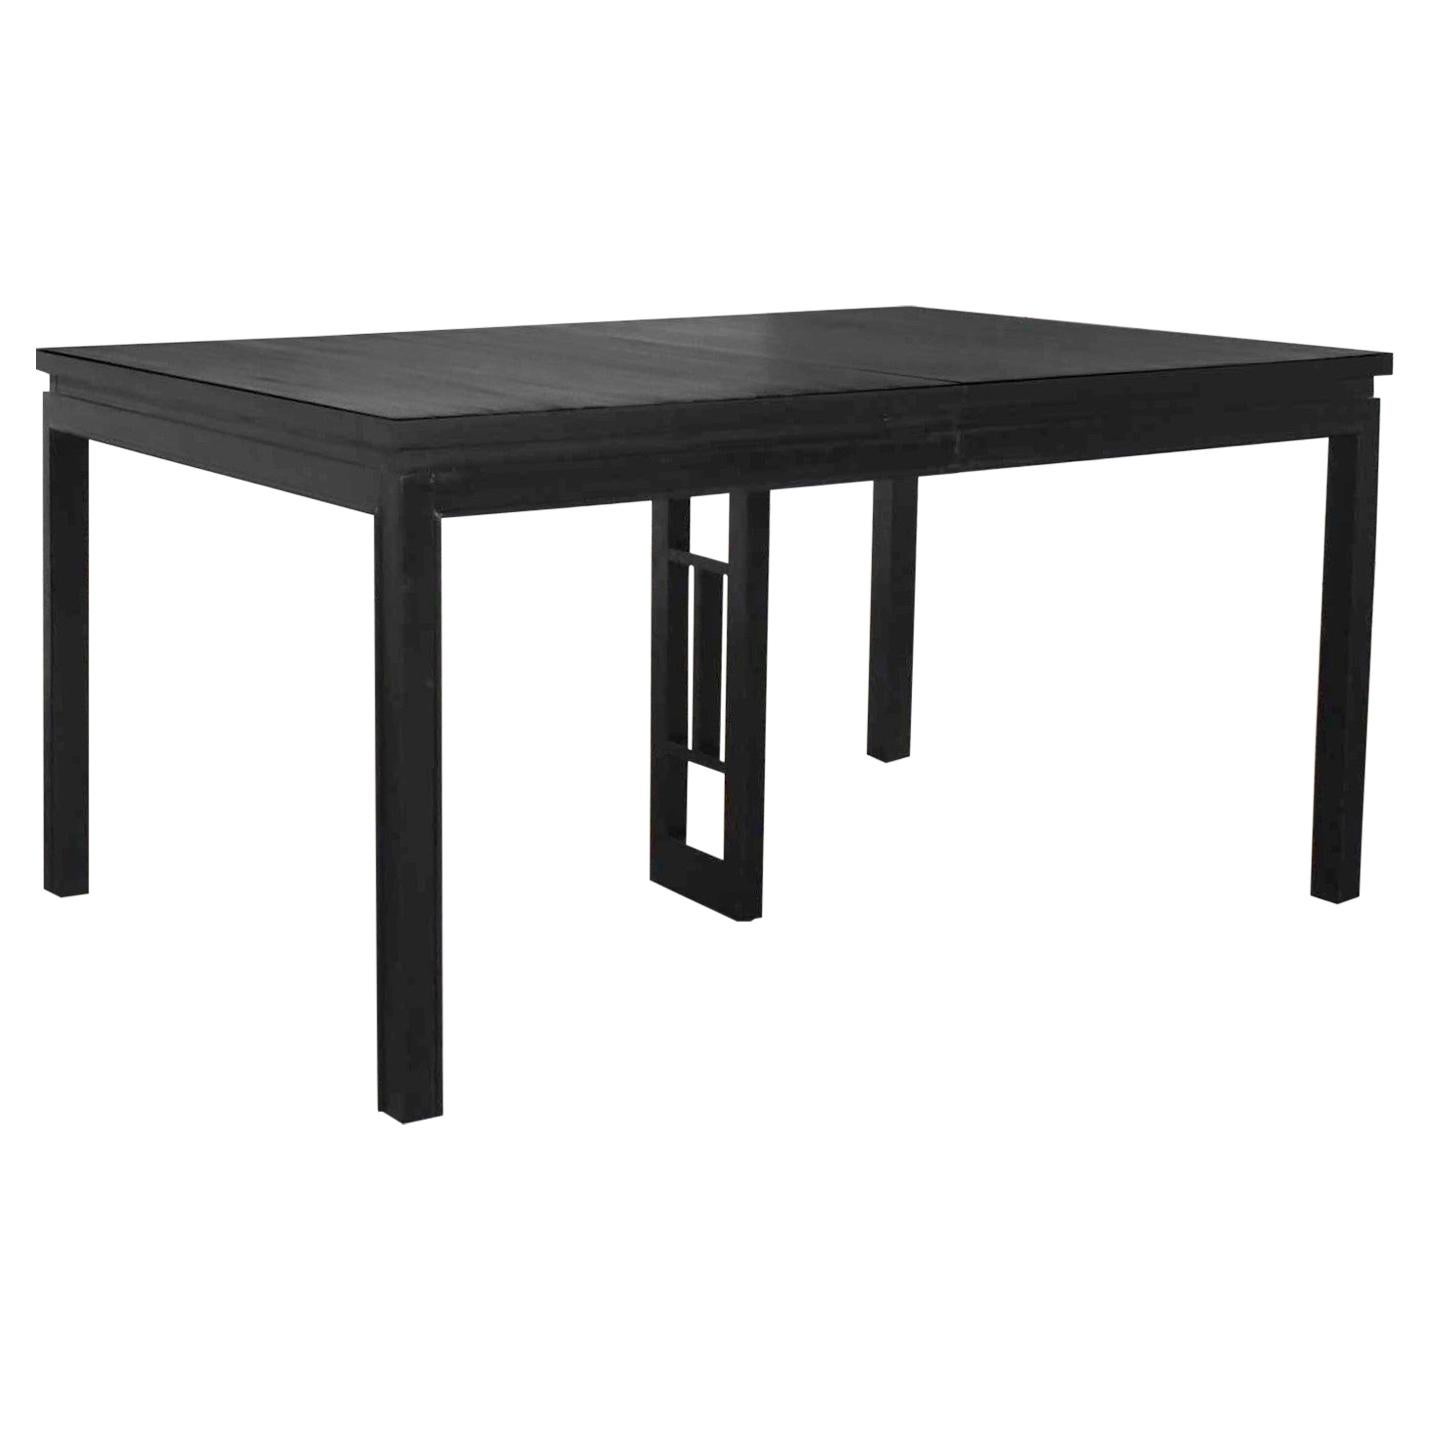 Asian Parson Style Black Extension Dining Table with Two Aproned Leaves For Sale